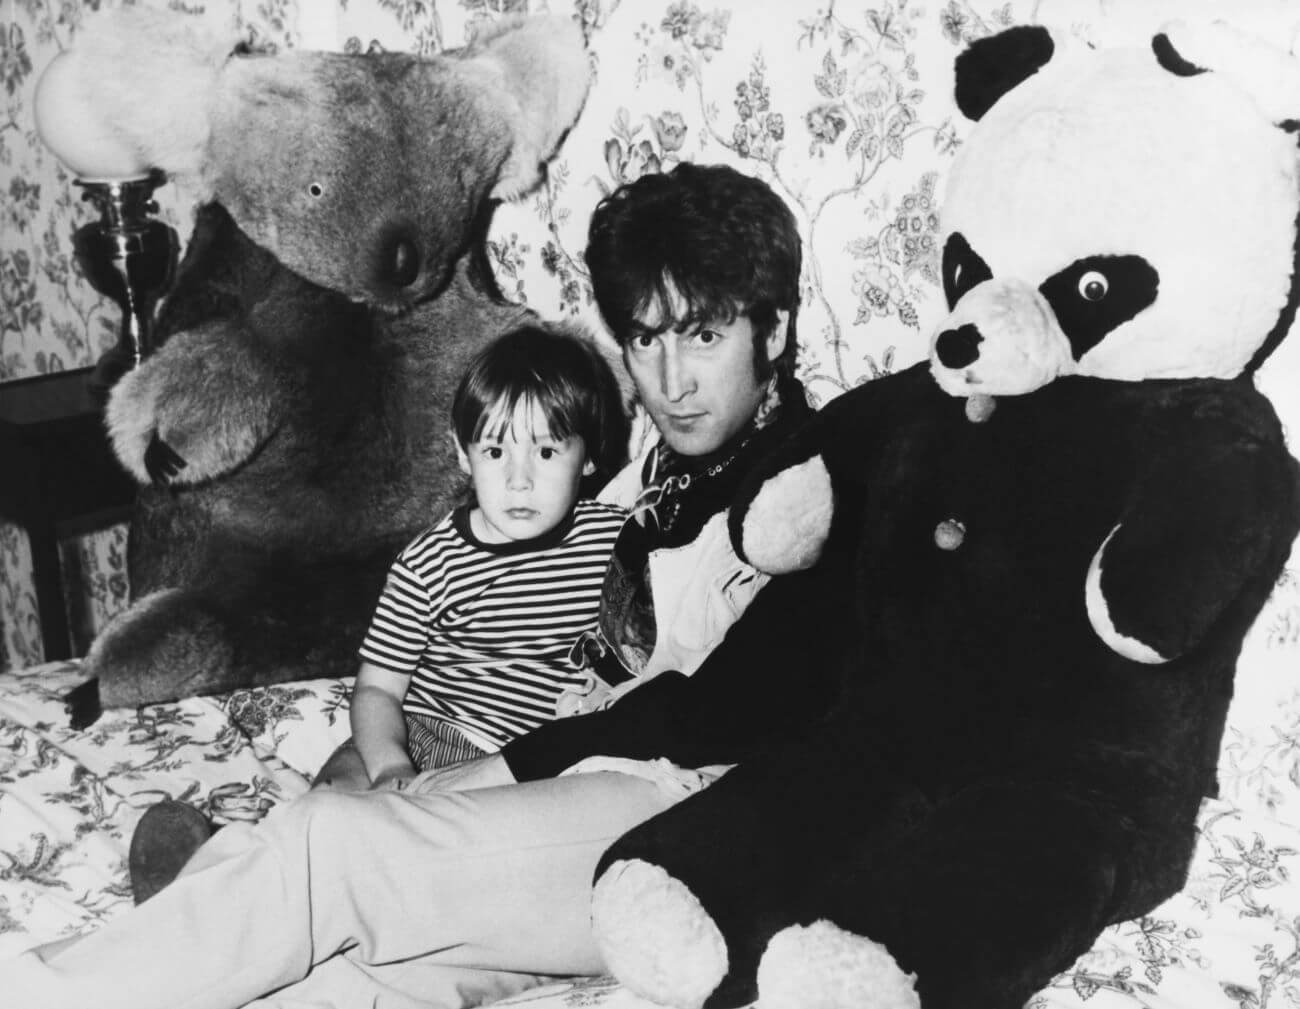 A black and white picture of Julian Lennon and John Lennon sitting on a bed between two large stuffed animals.